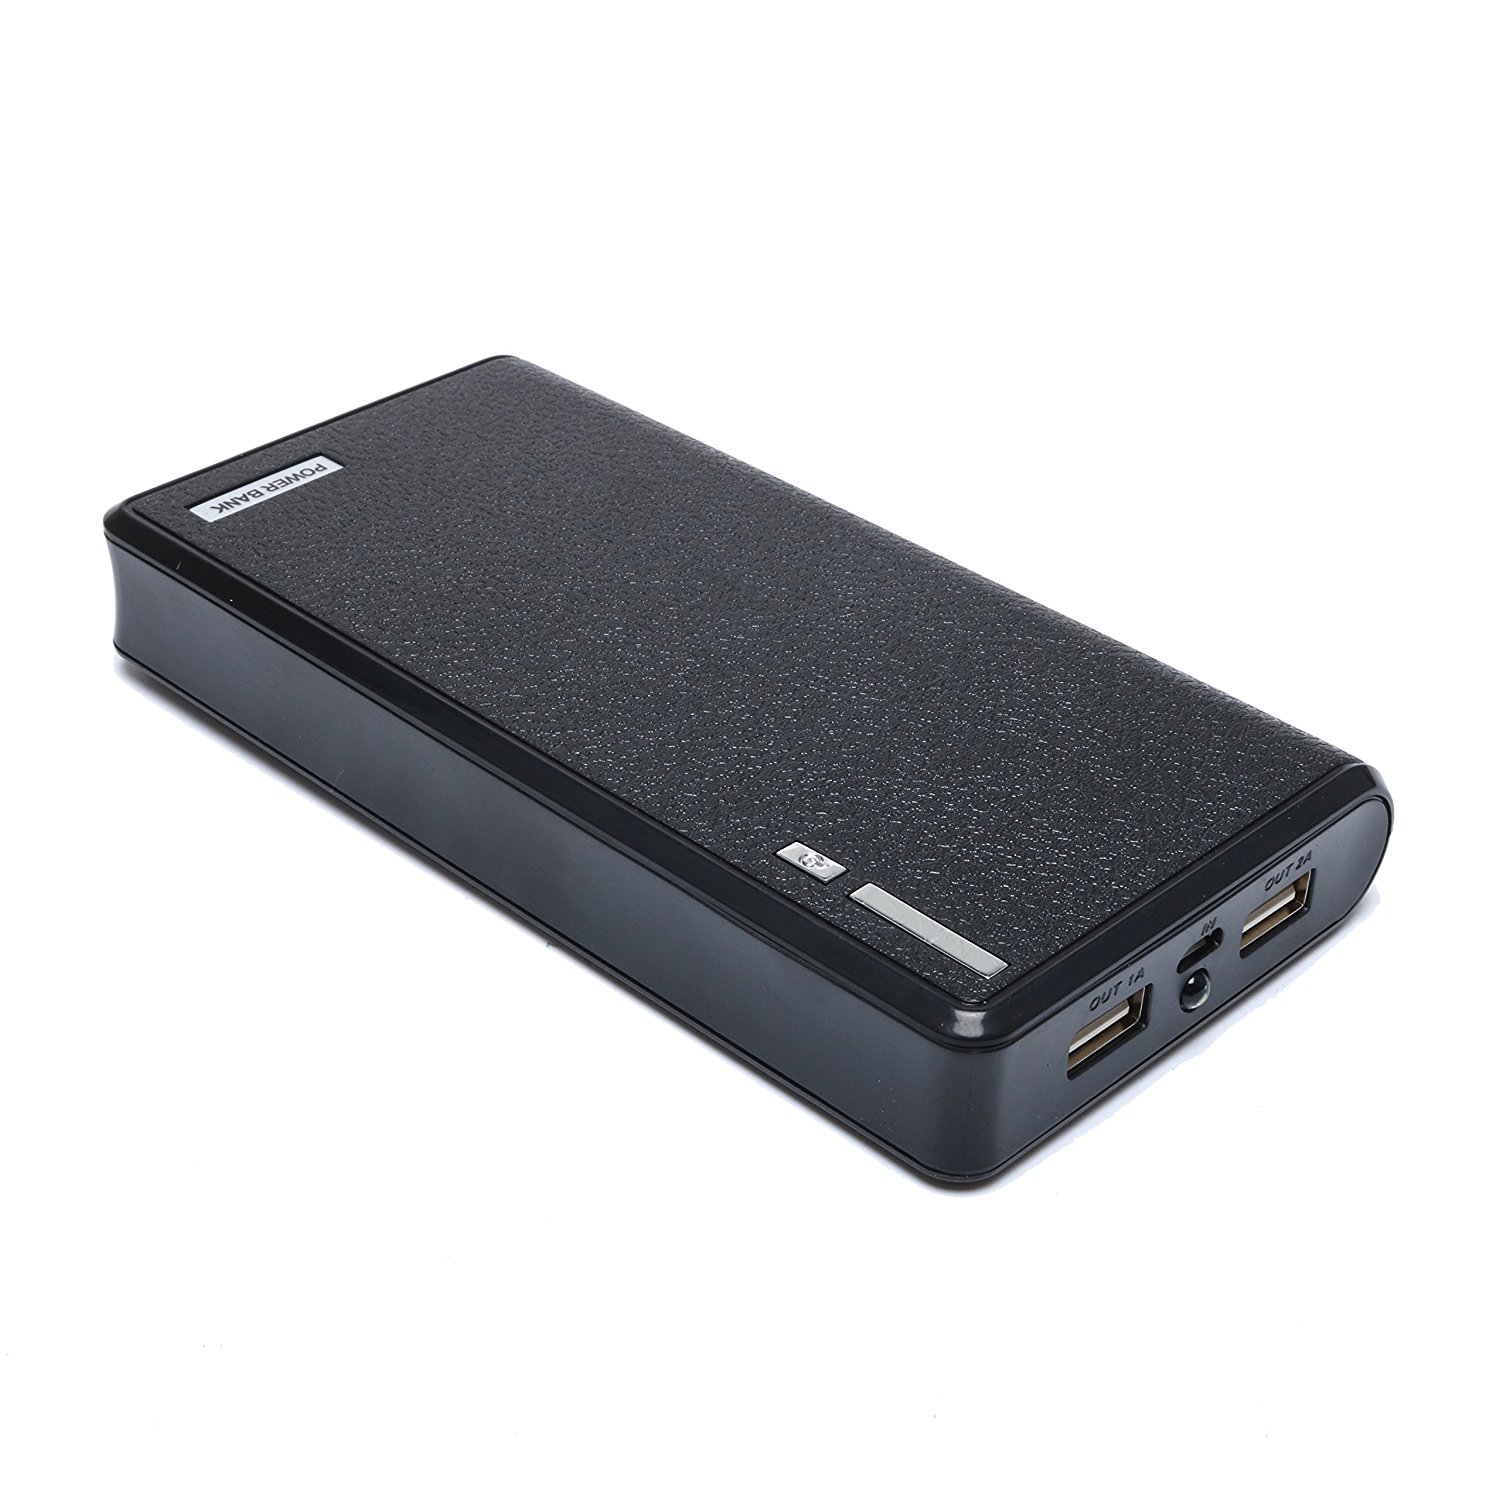 20000mAh Portable Charger External Battery Power Bank for iPhone 6 6S Plus 5S, iPad ...